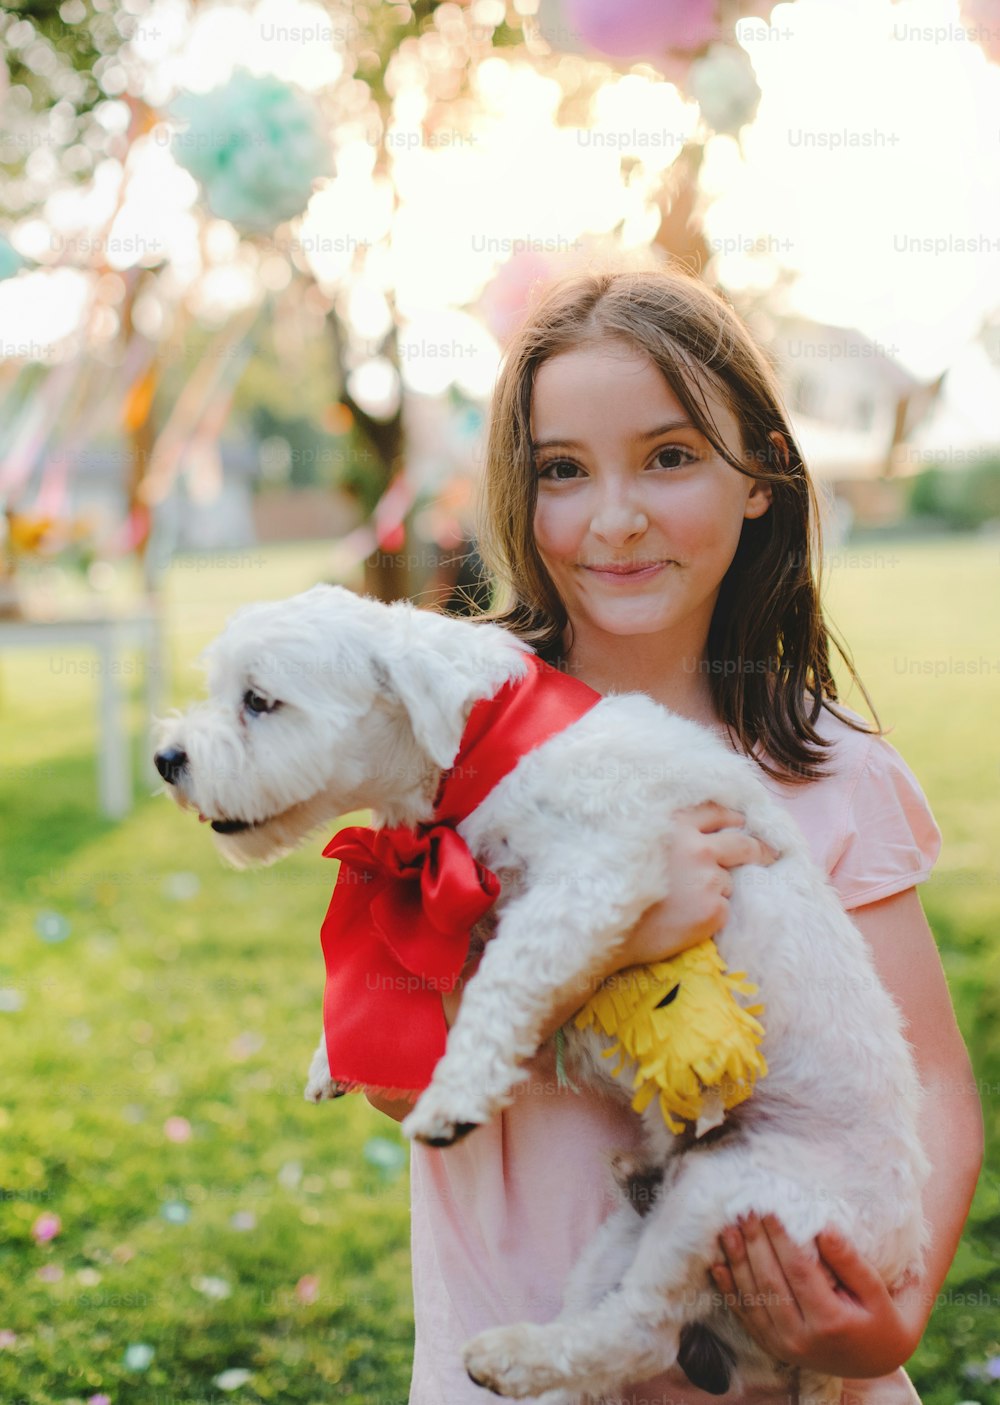 Portrait of small girl with present pet dog outdoors in garden in summer, looking at camera.